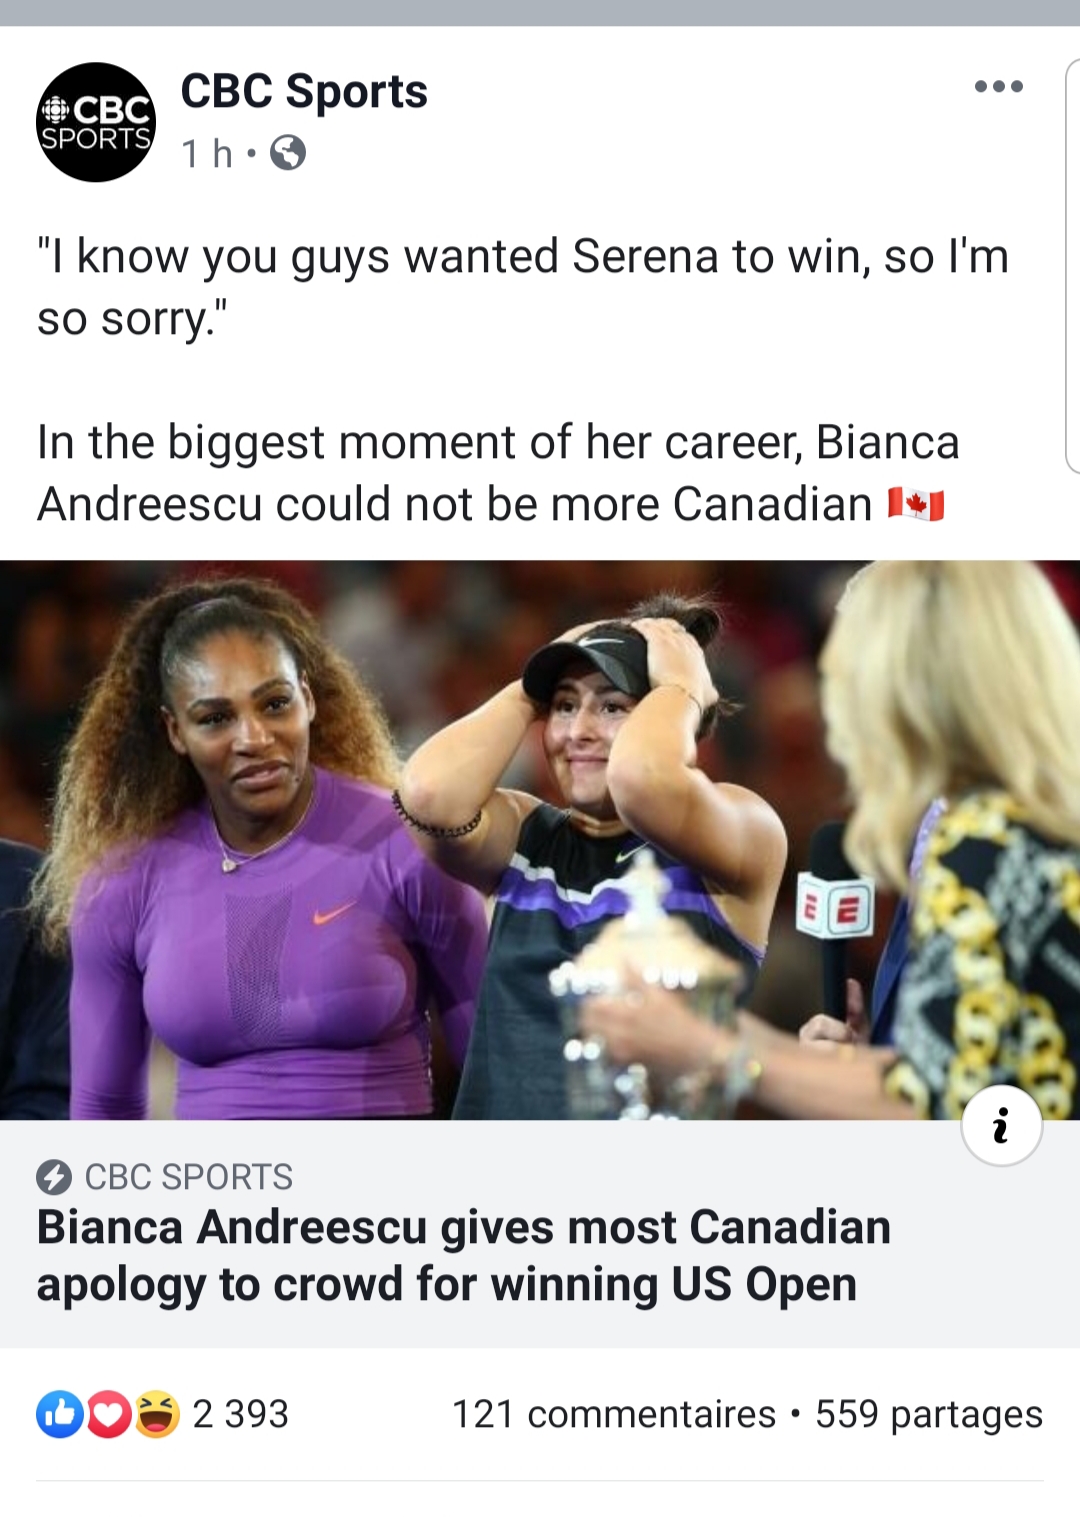 us open bianca - Cbc Cbc Sports 1h. "I know you guys wanted Serena to win, so I'm so sorry." In the biggest moment of her career, Bianca Andreescu could not be more Canadian Cbc Sports Bianca Andreescu gives most Canadian apology to crowd for winning Us O